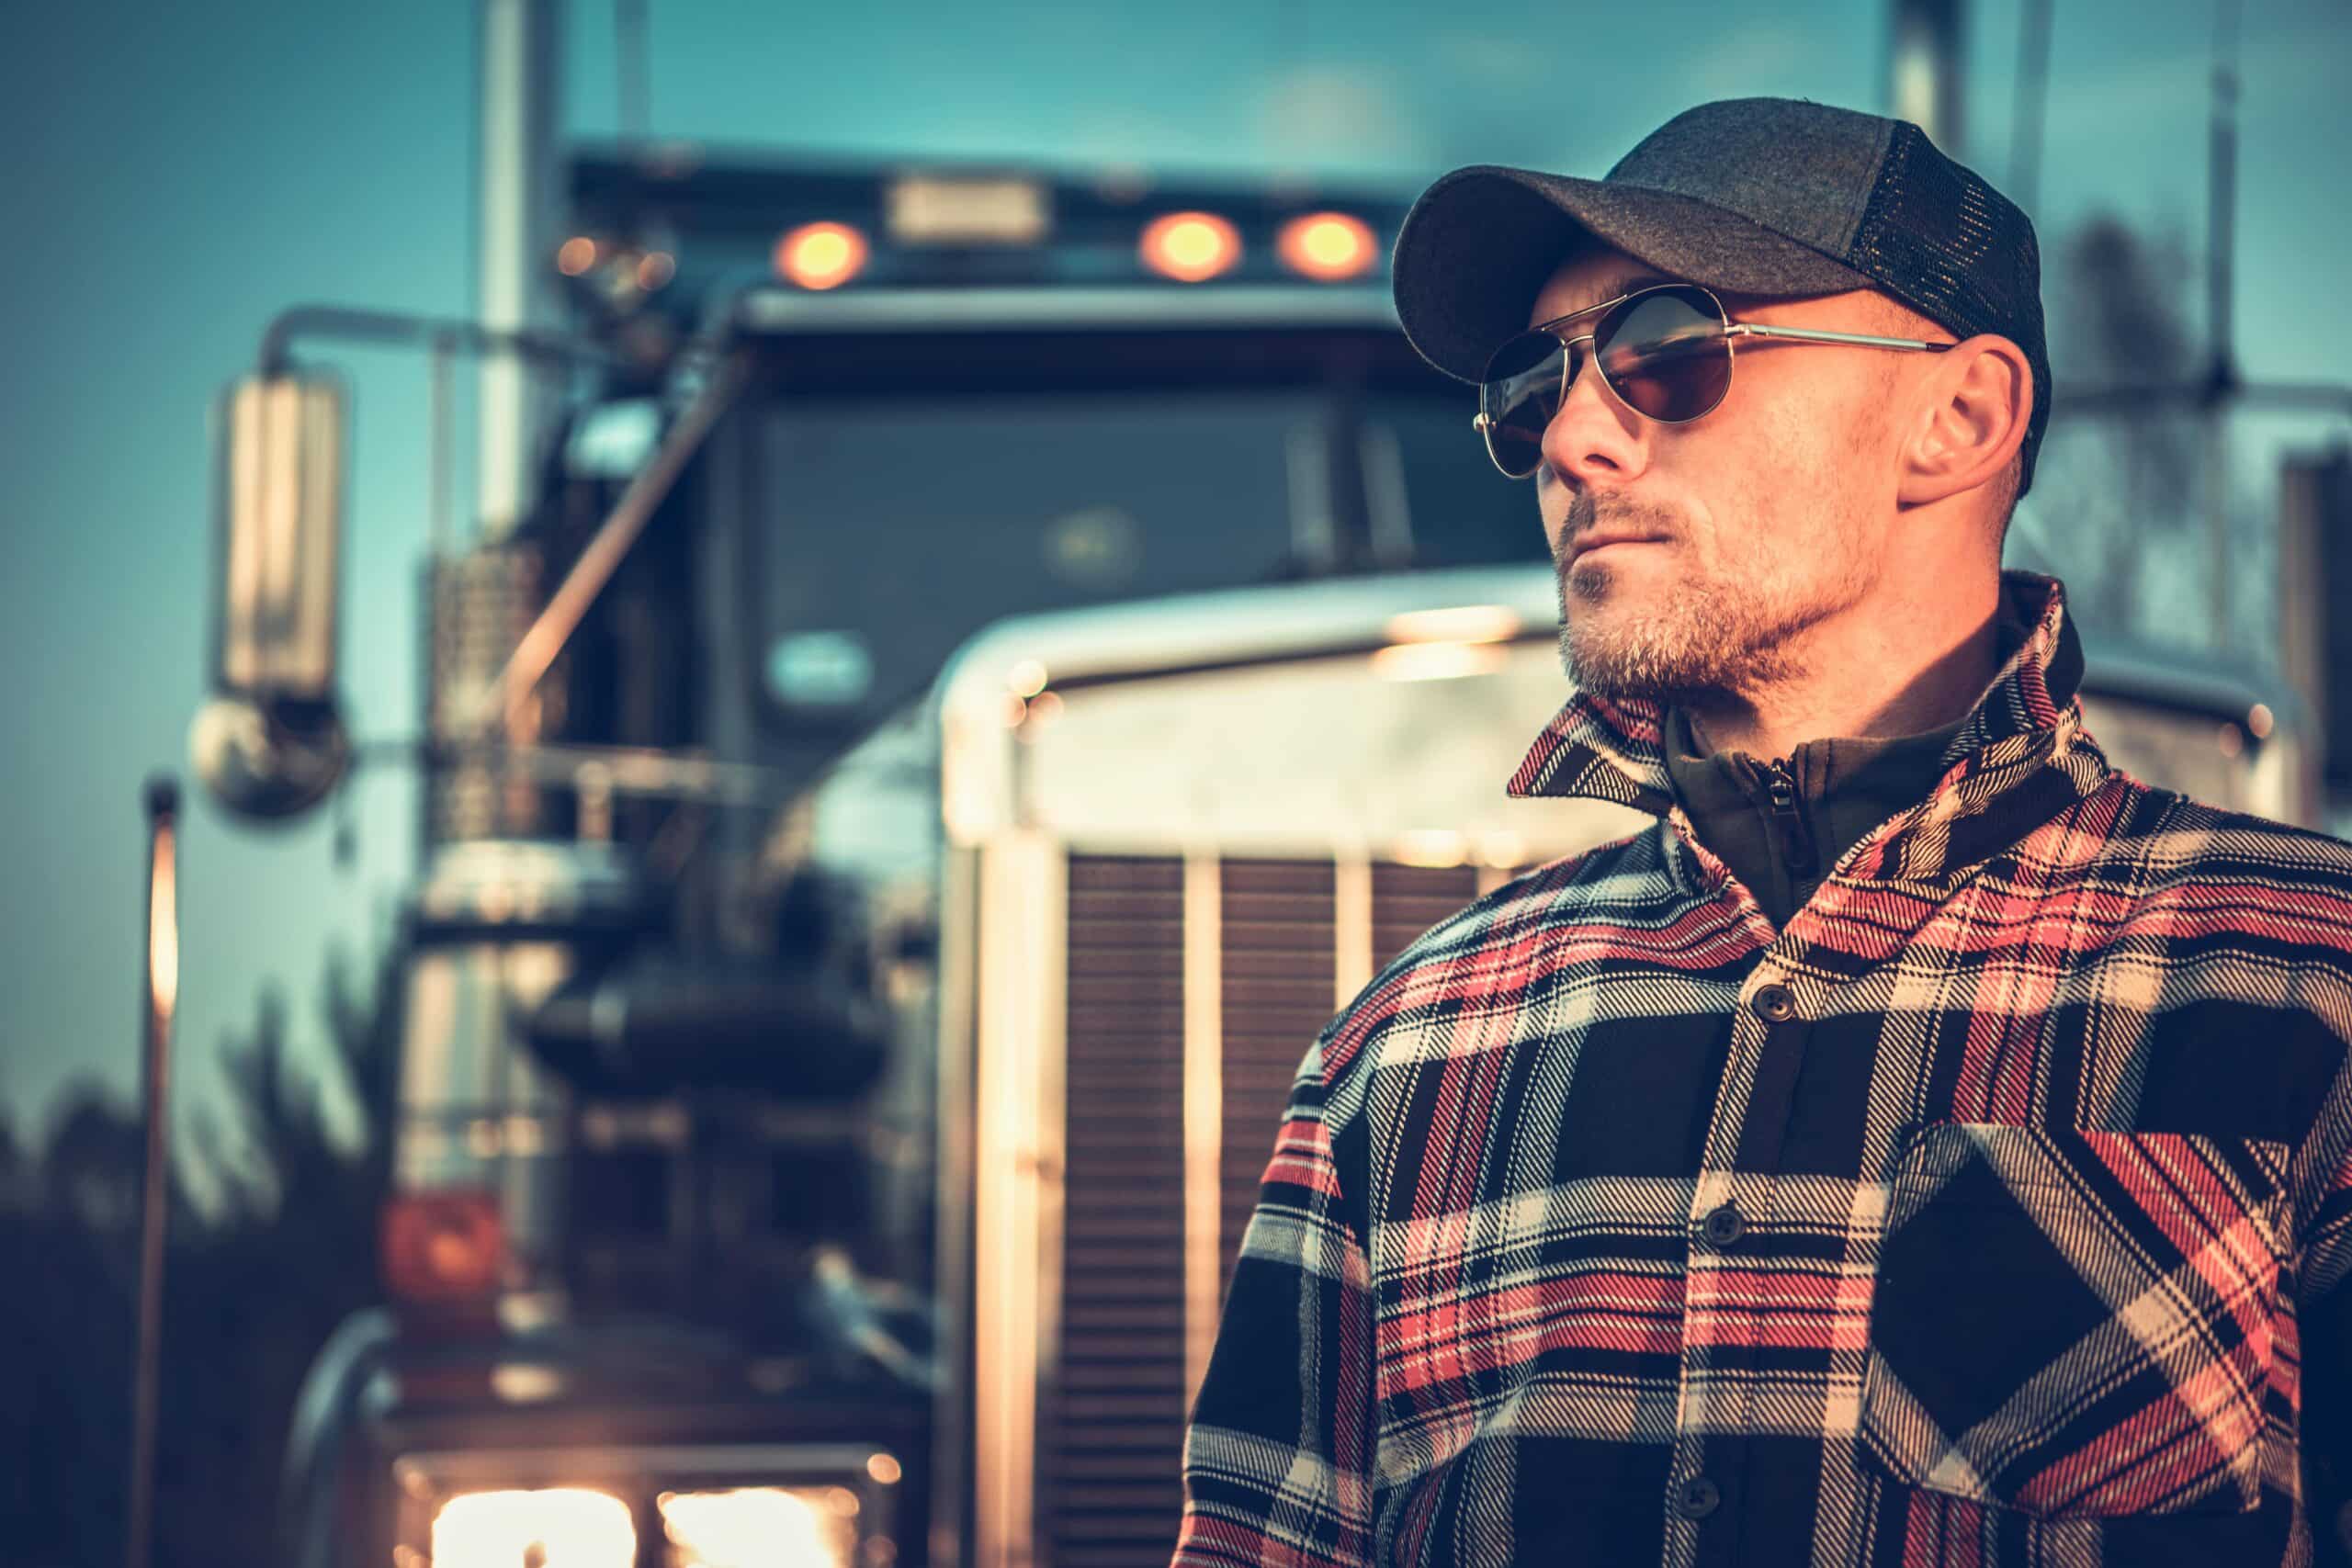 Semi-truck driver wearing sunglasses, standing in front of truck